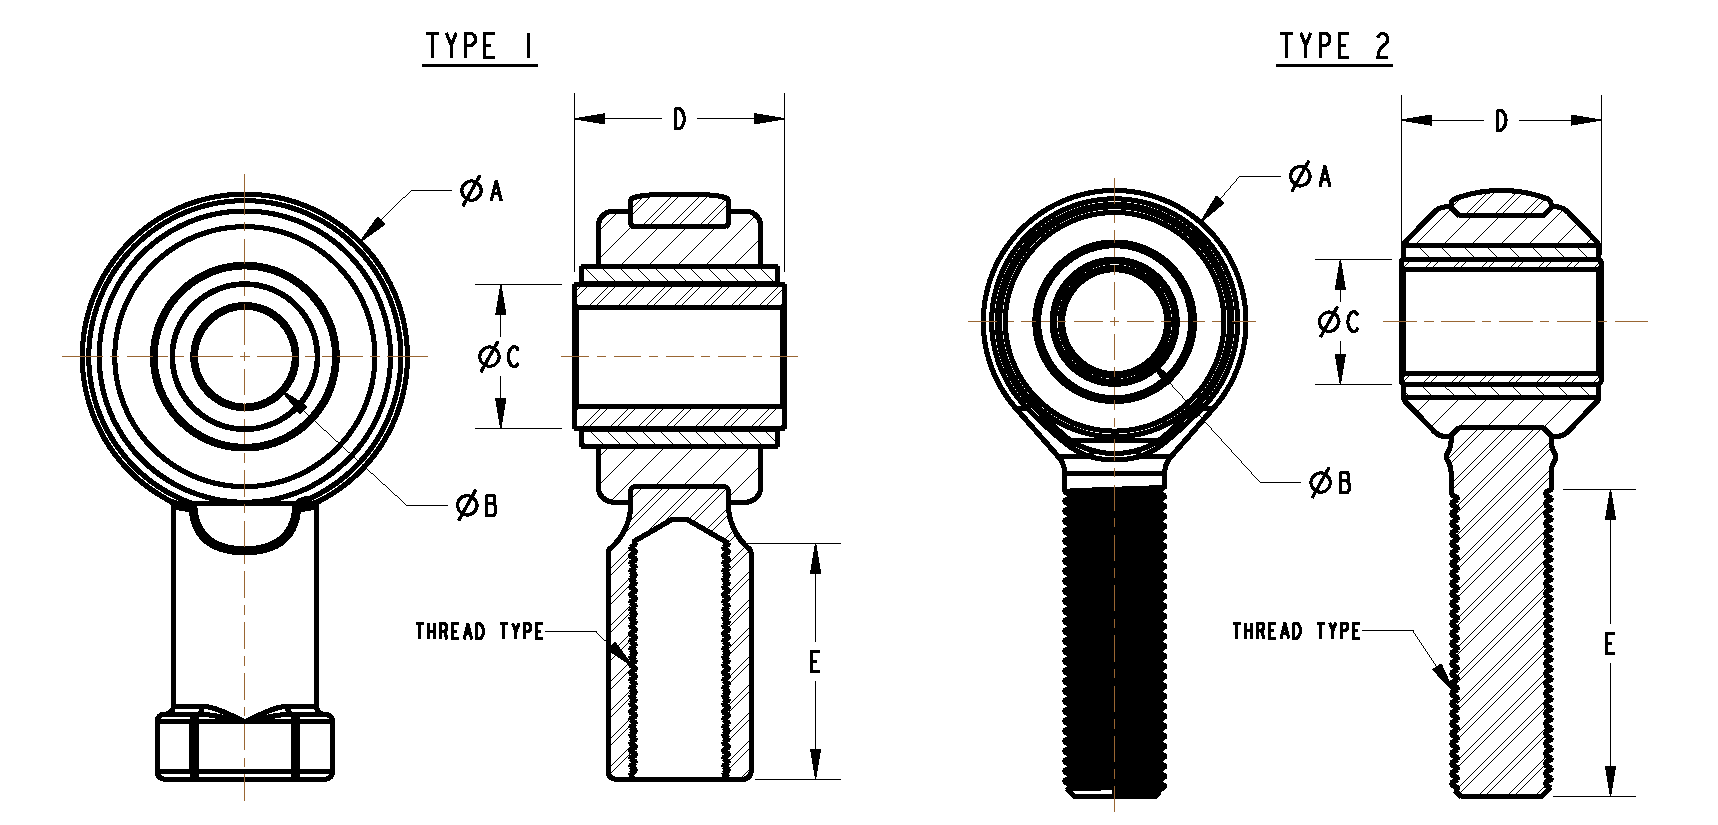 Specification Sheet of a Rod-End Rubber Bushing